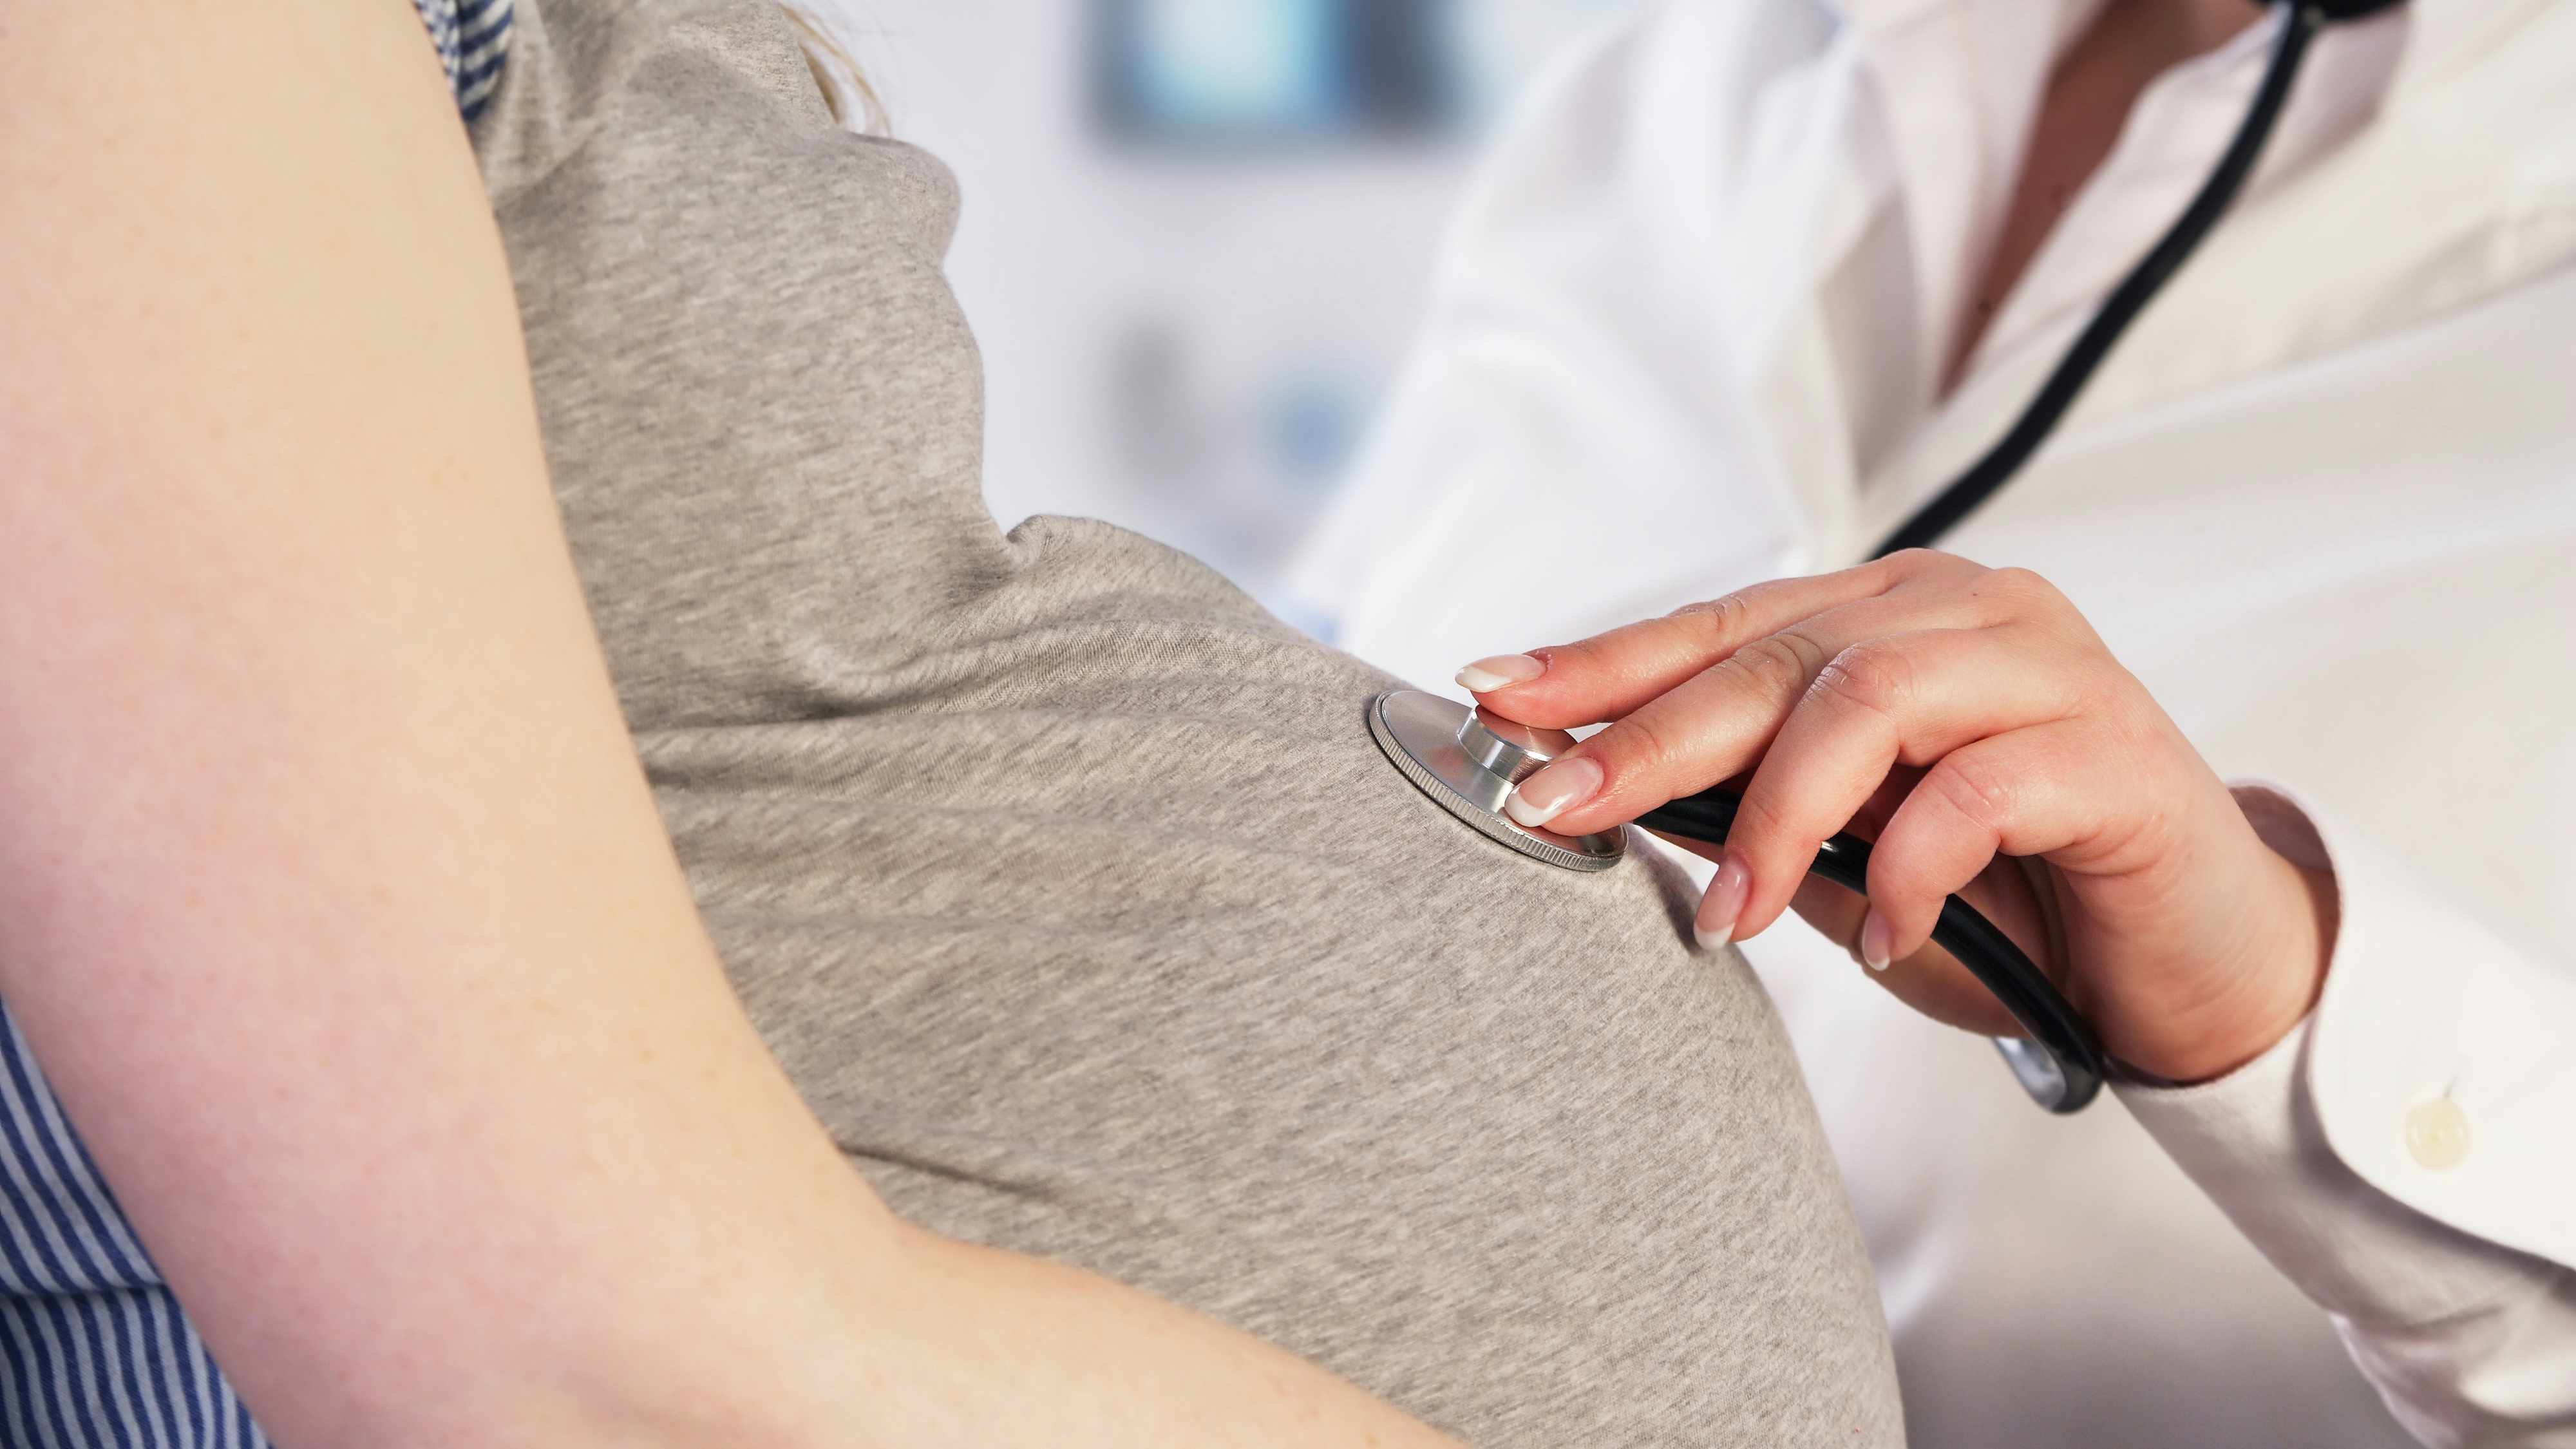 a pregnant women being examined at a doctor appointment with a stethoscope